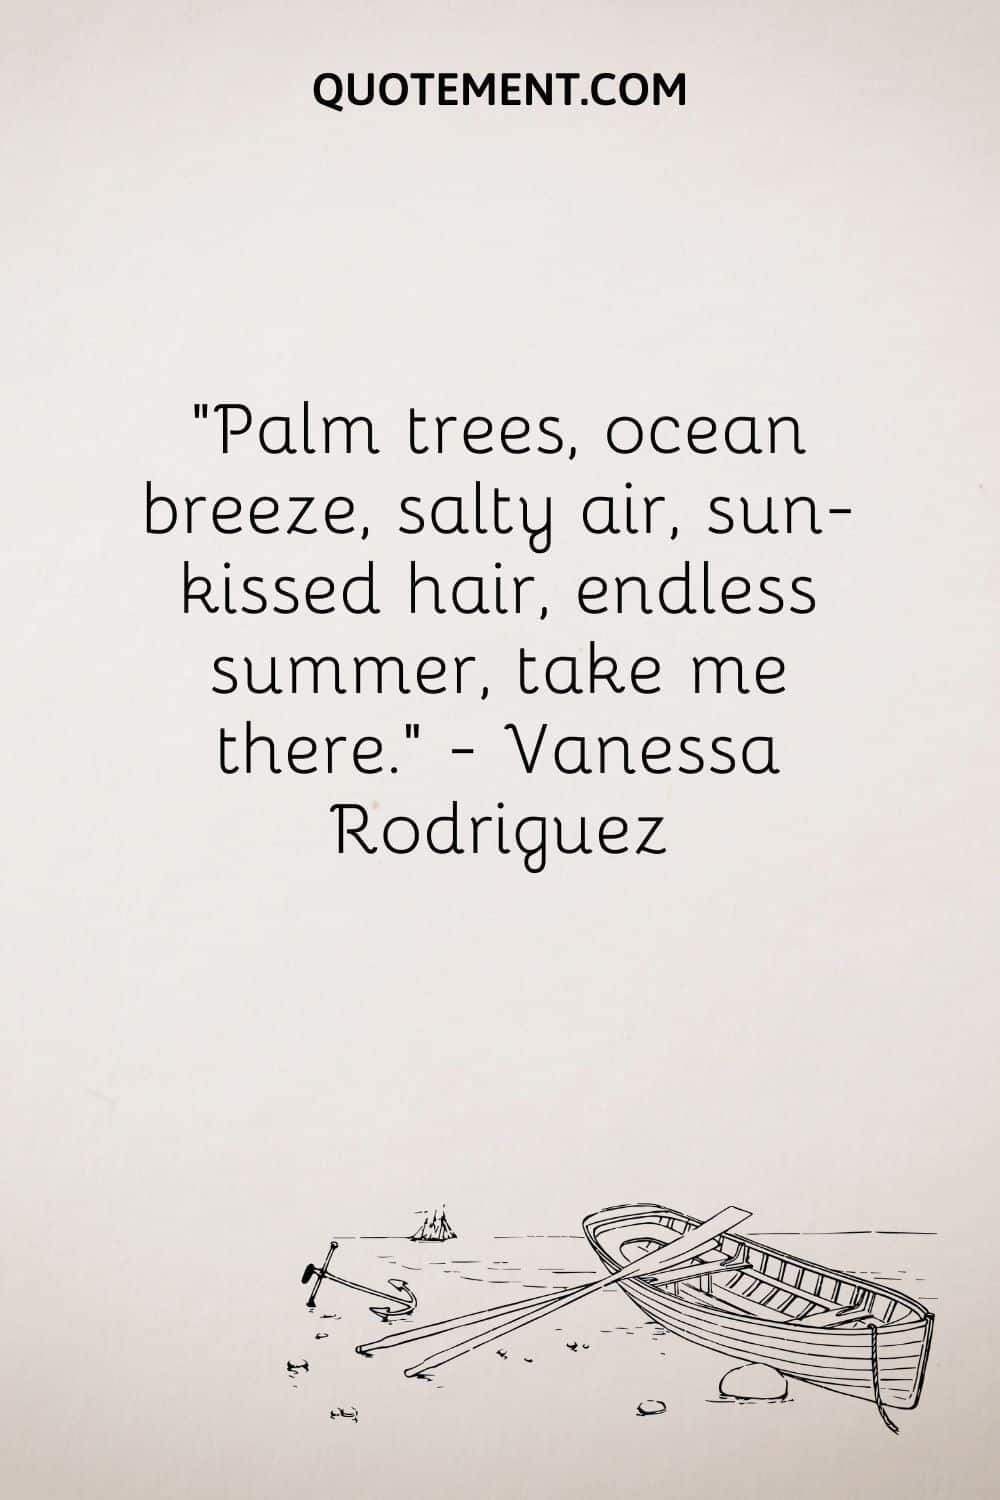 Palm trees, ocean breeze, salty air, sun-kissed hair, endless summer, take me there. — Vanessa Rodriguez